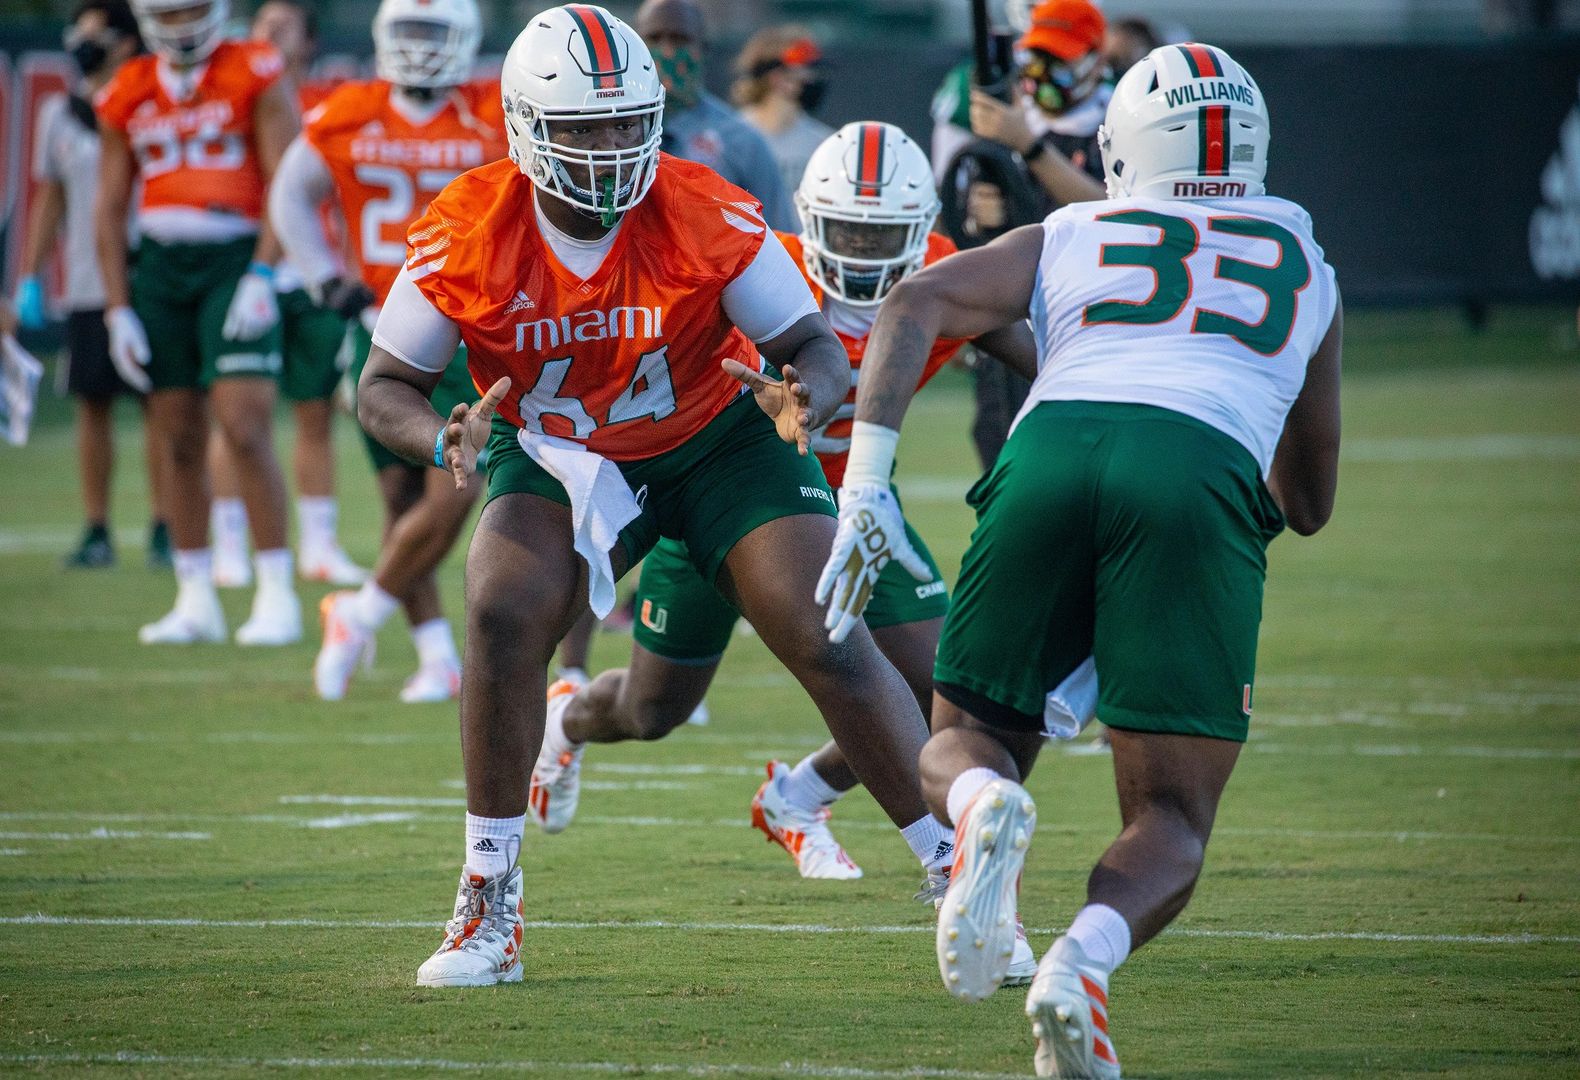 Finally, Canes Return to Greentree